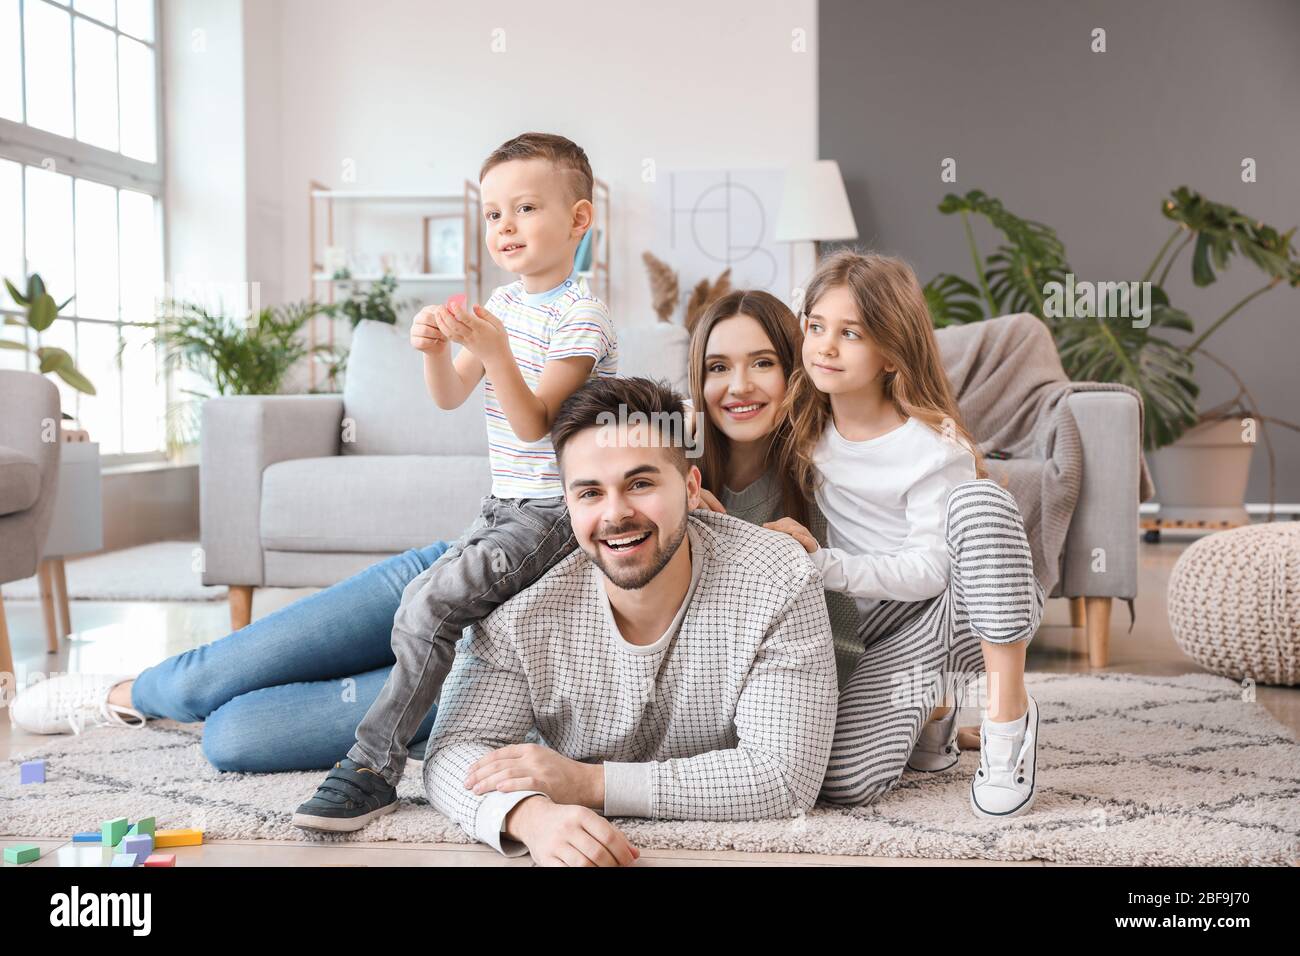 Happy family spending time together at home Stock Photo